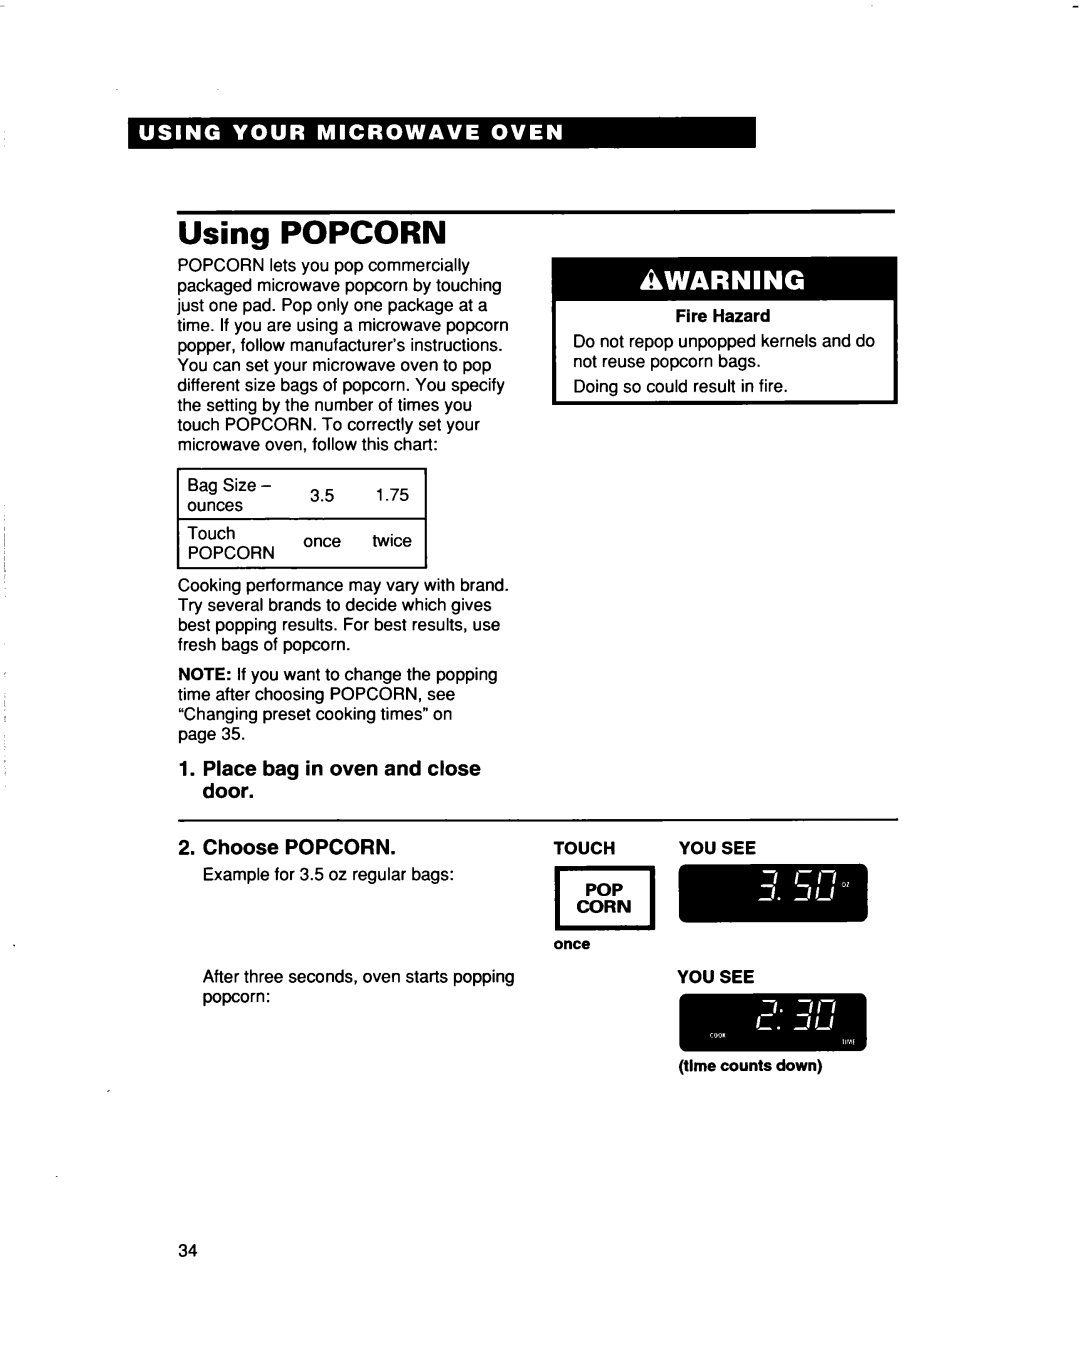 Whirlpool MHEI IRD warranty Using POPCORN, Place bag in oven and close door, Choose POPCORN, Fire Hazard, Touch You See 